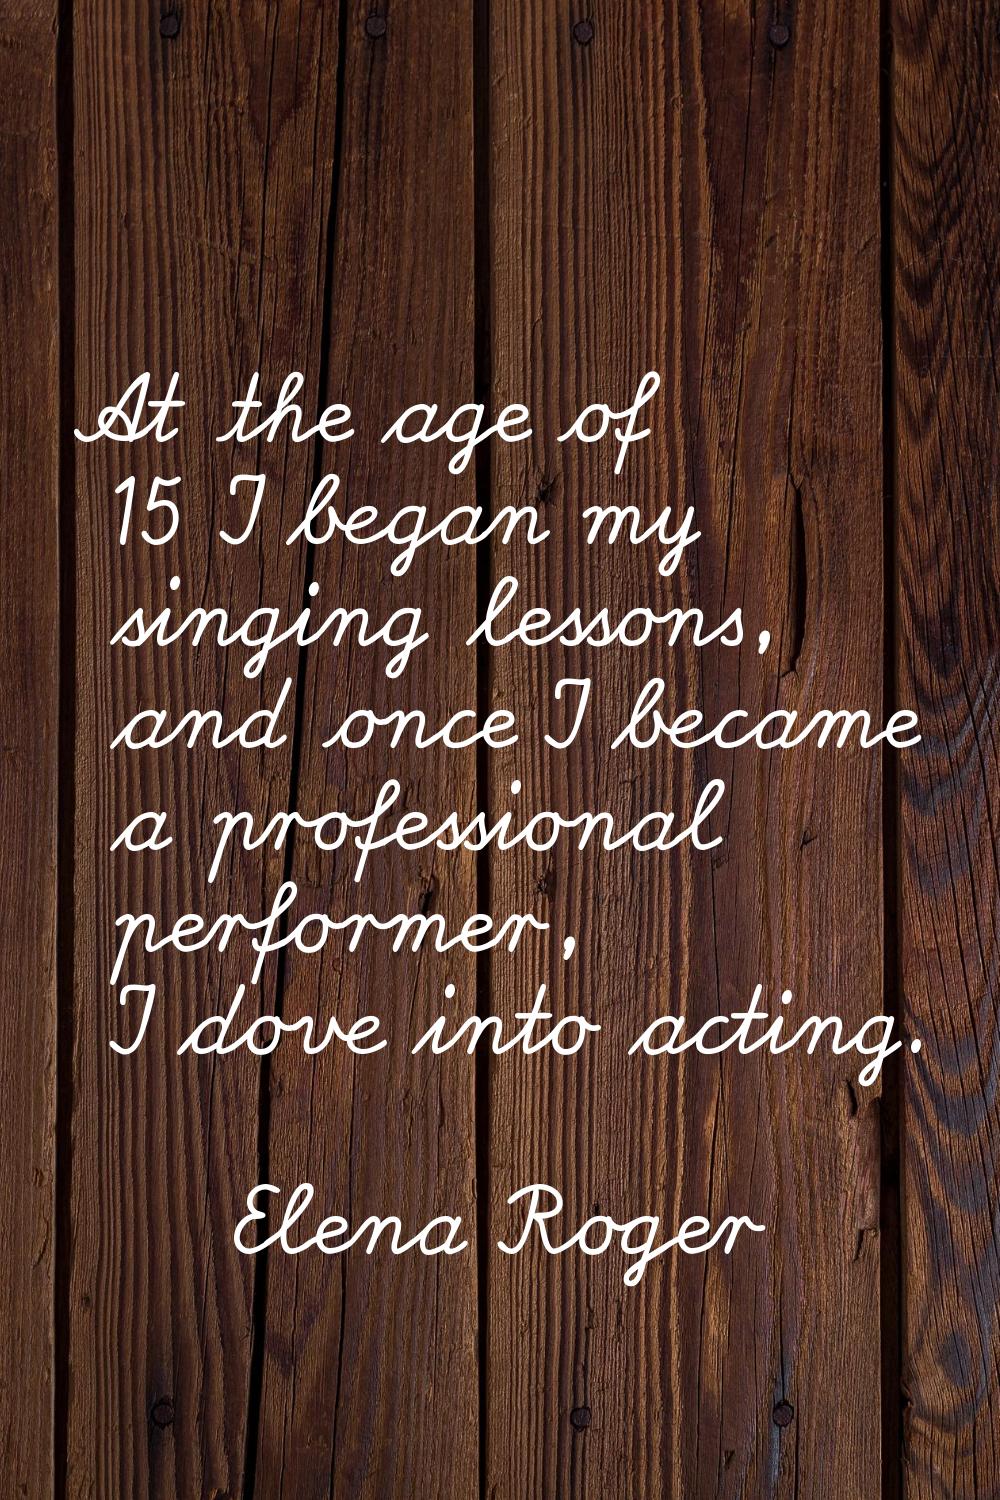 At the age of 15 I began my singing lessons, and once I became a professional performer, I dove int